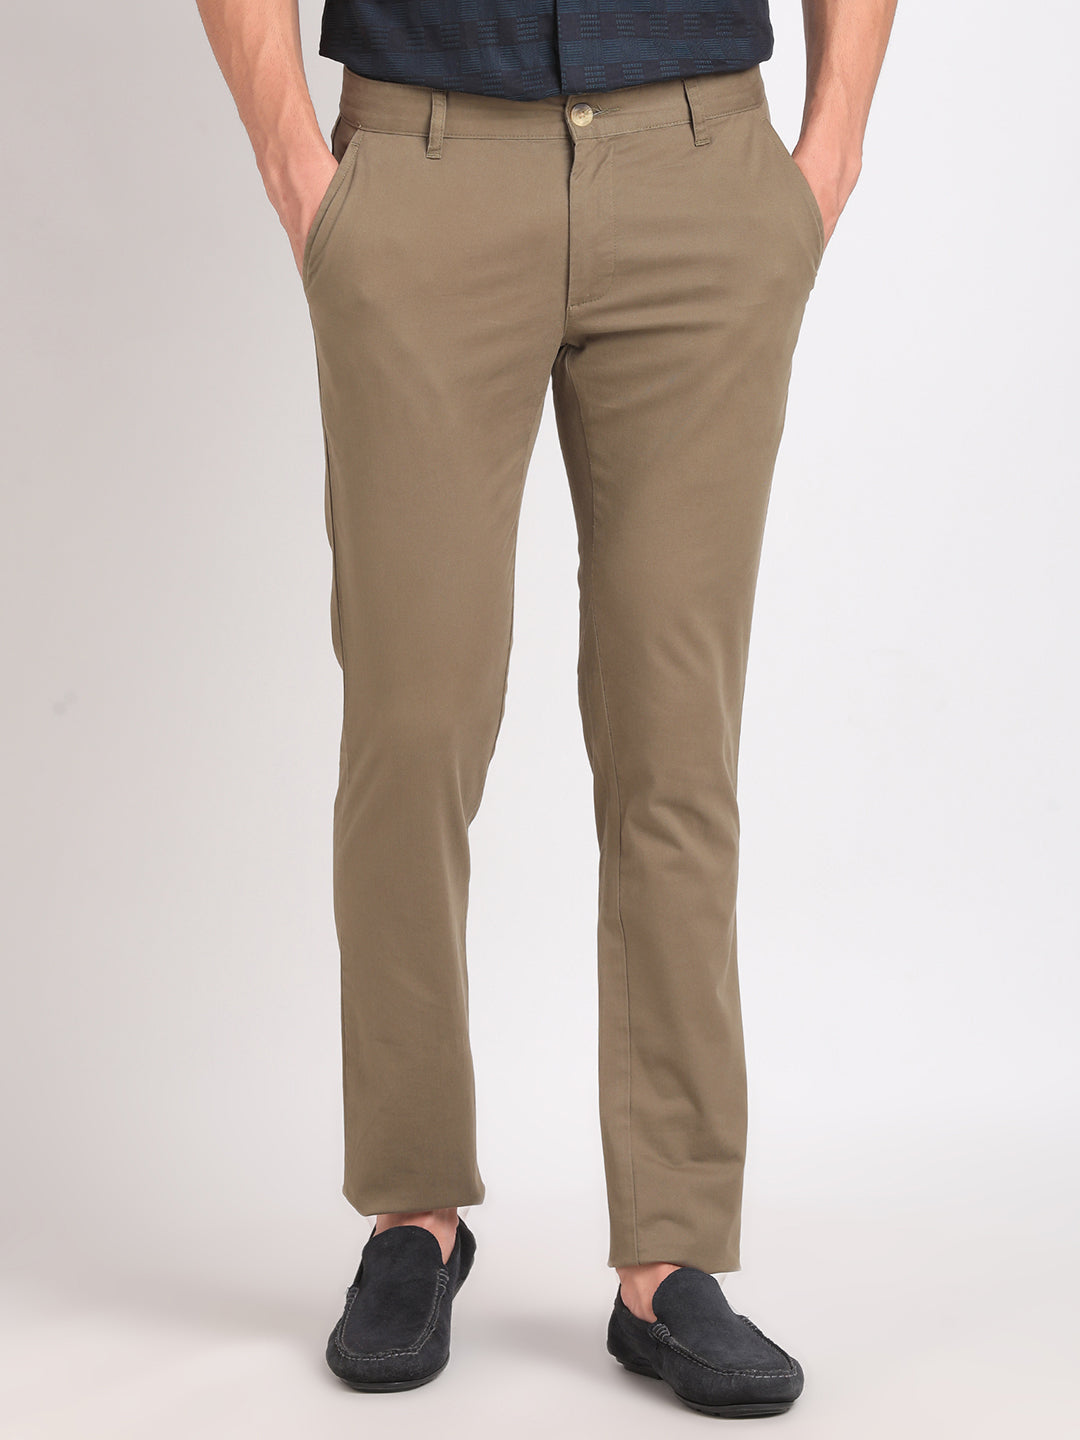 Airweft Twill Adrien Chino in Sesame | 7 For All Mankind